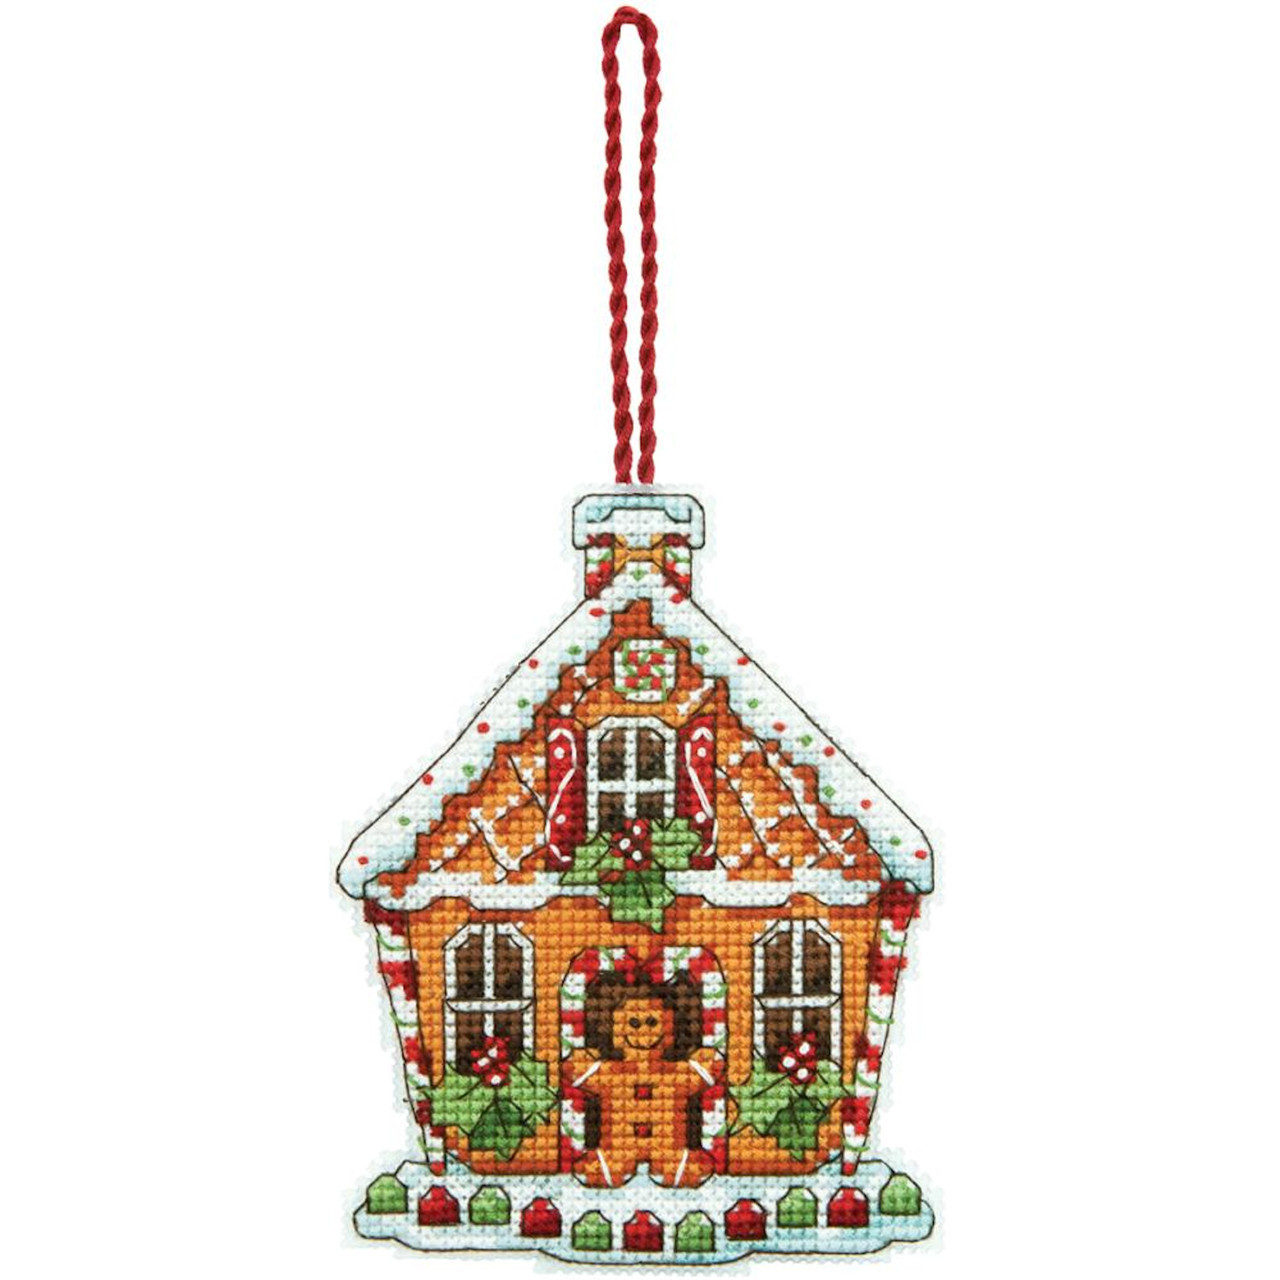 Gingerbread House Snow Globe Beaded Counted Cross Stitch Kit